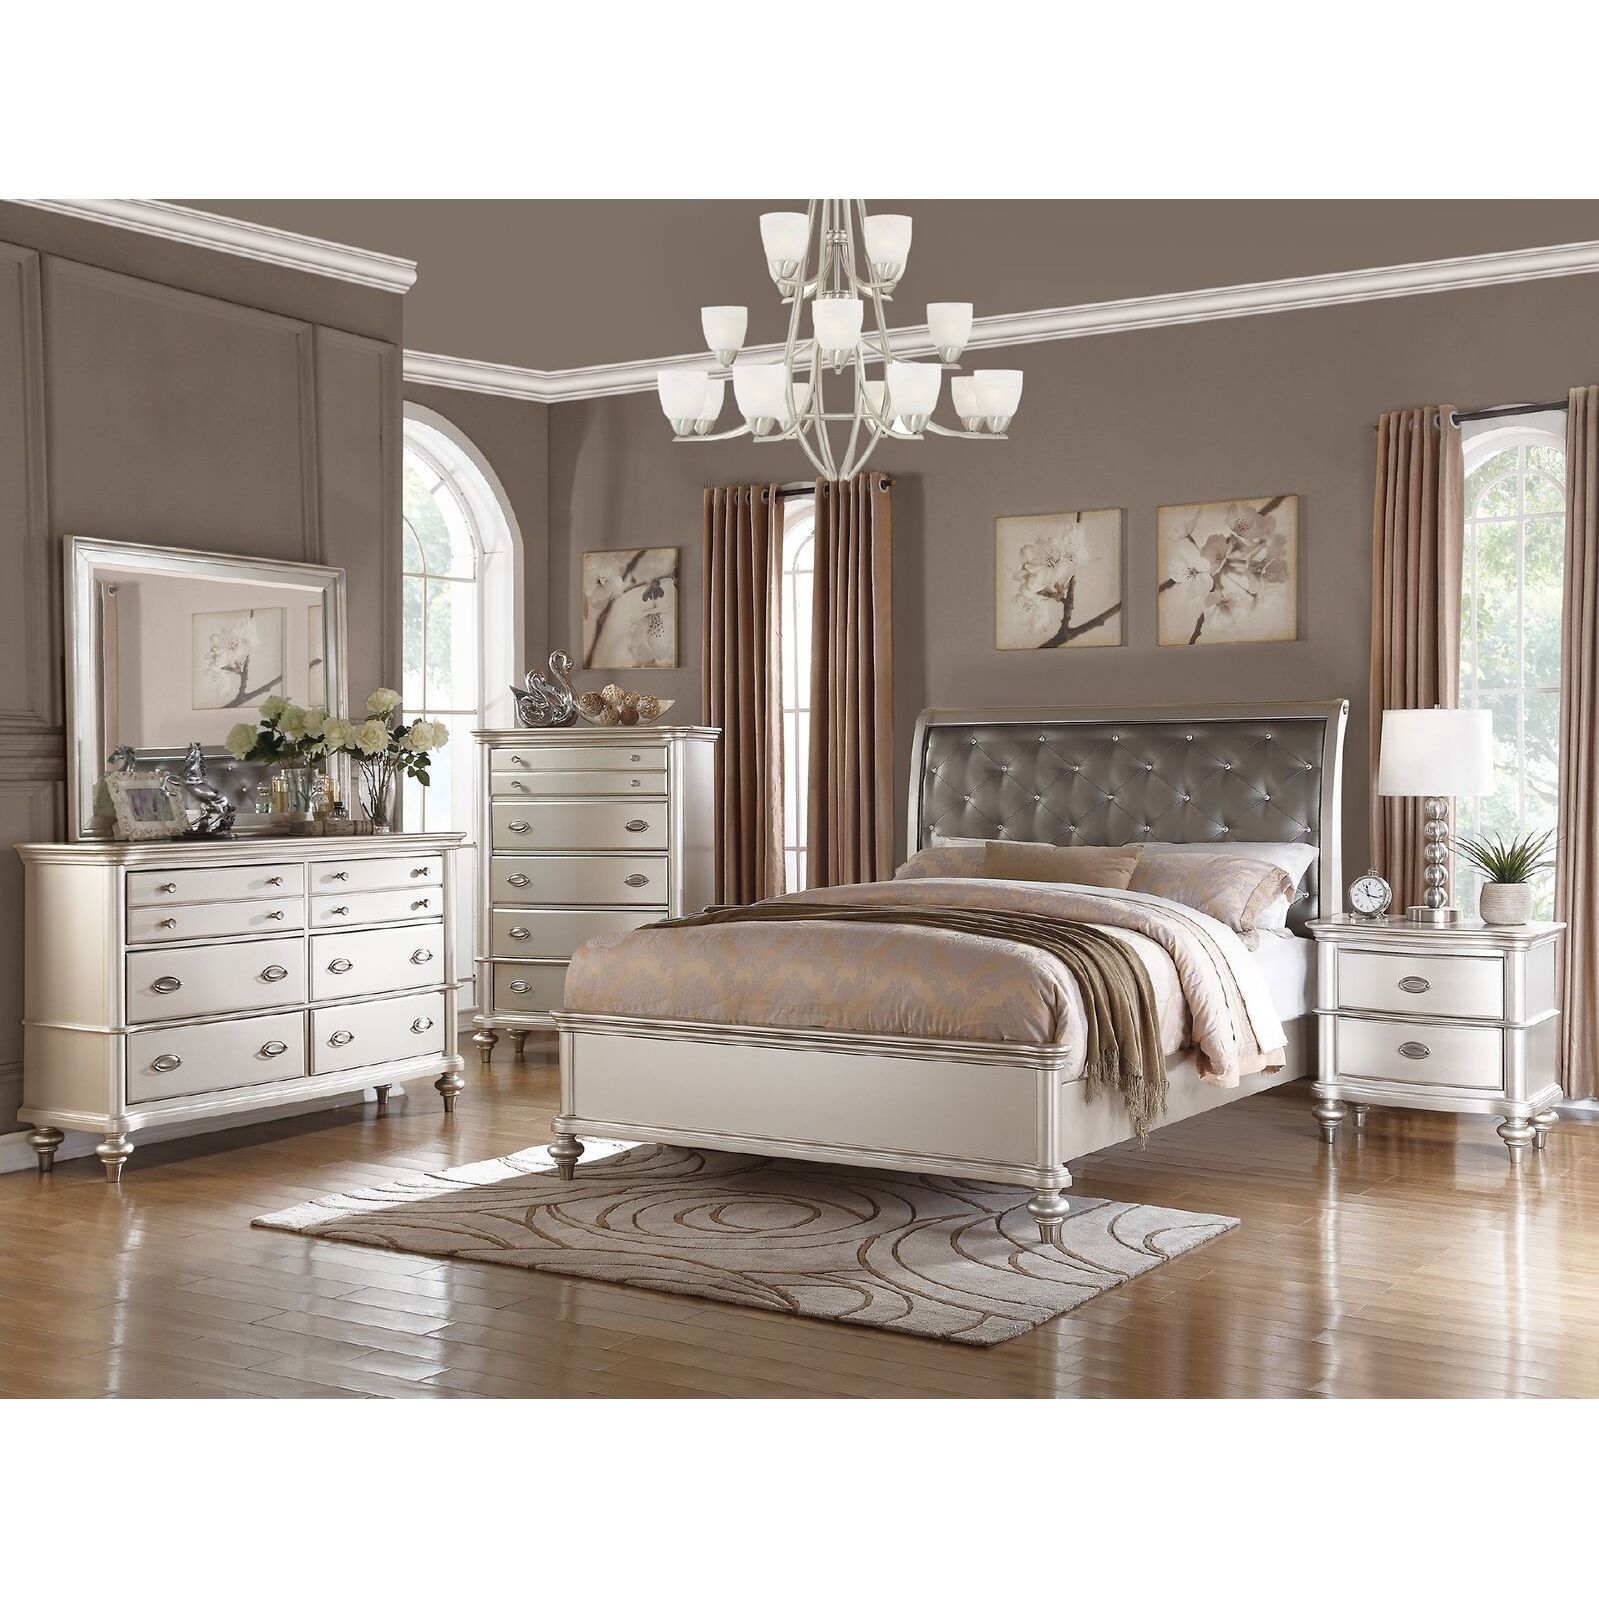 Saveria 5 Piece Bedroom Set Overstock Shopping The Best Deals On As Is regarding sizing 1599 X 1599